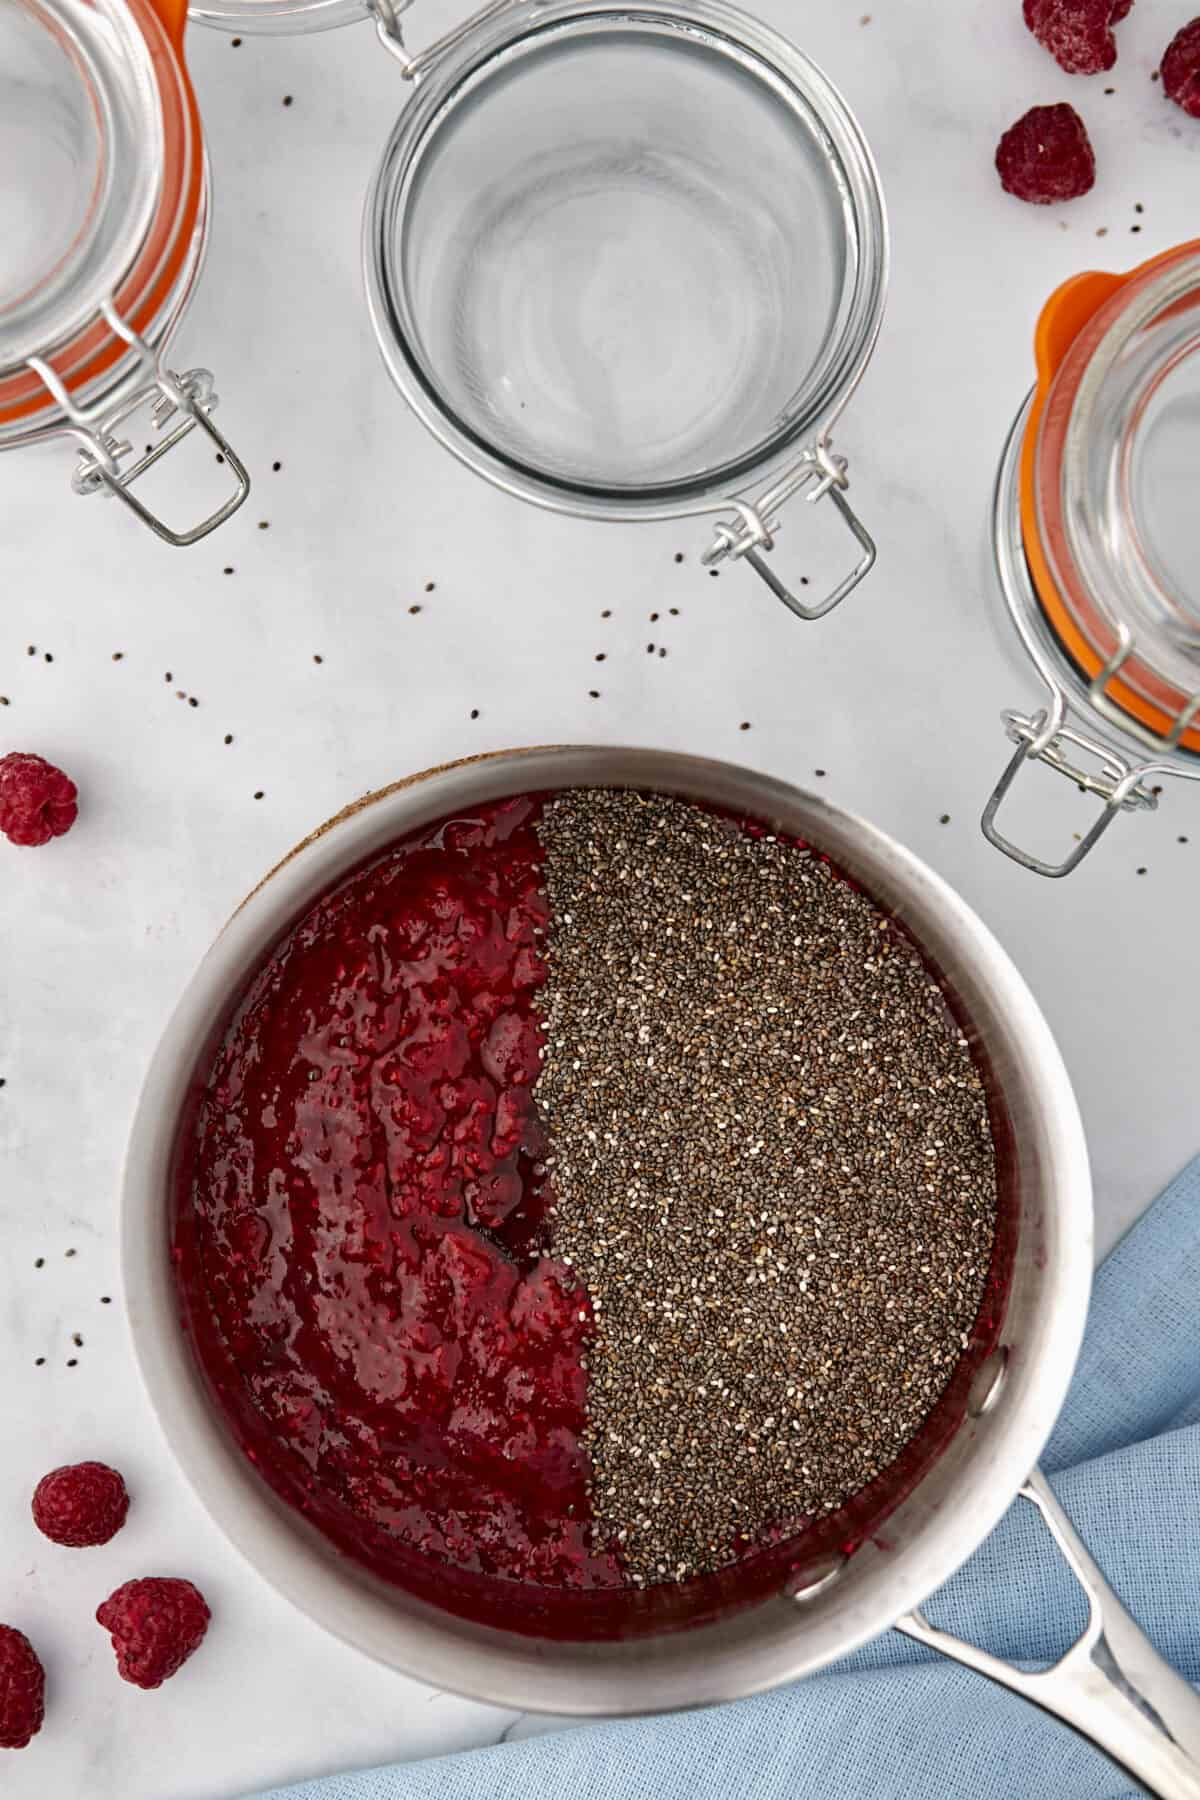 chia seeds added to the sauce pan with the raspberries.